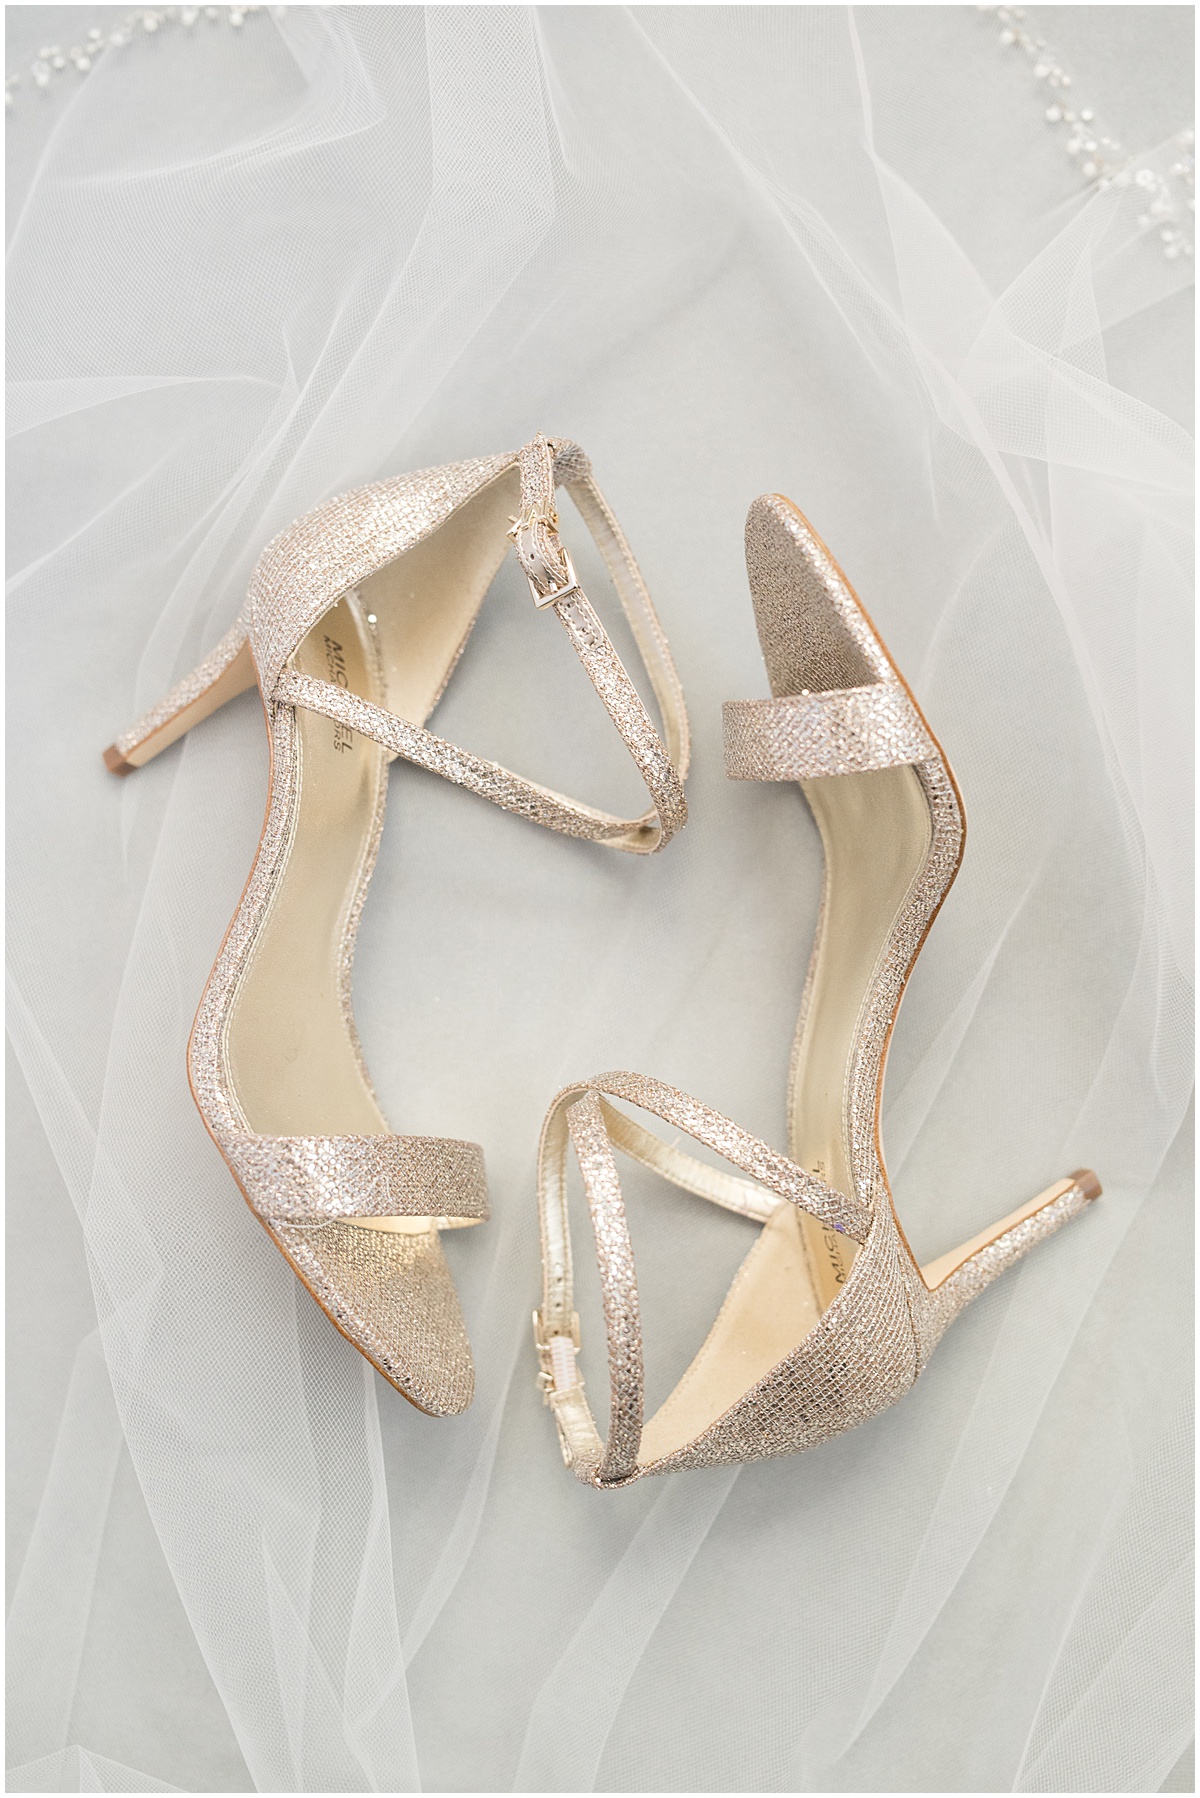 Bride's wedding day shoes for Rensselaer, Indiana wedding